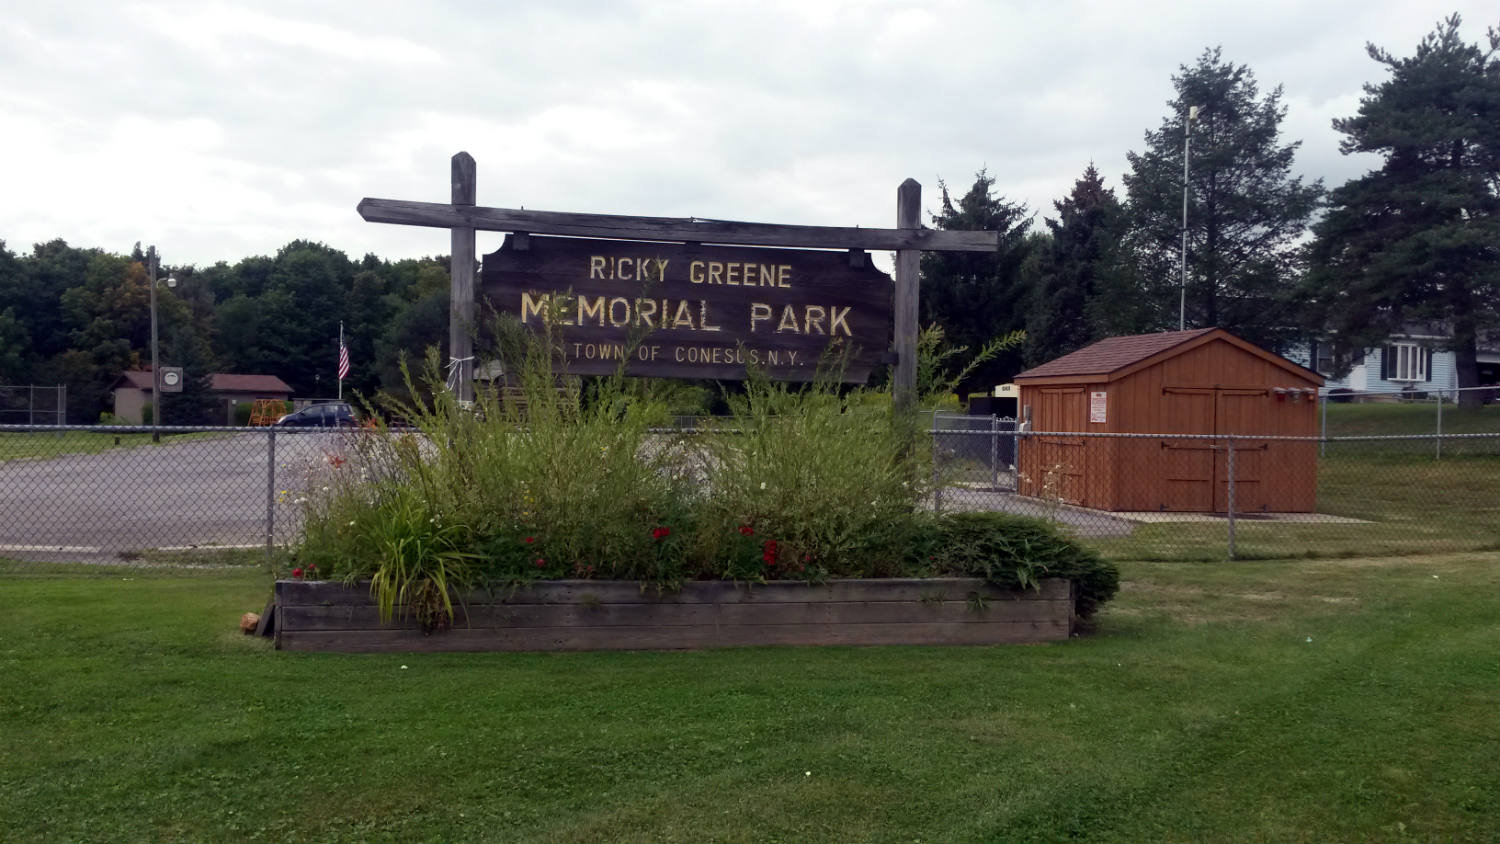 The Legacy of Ricky Greene Memorial Park - Exploring Upstate